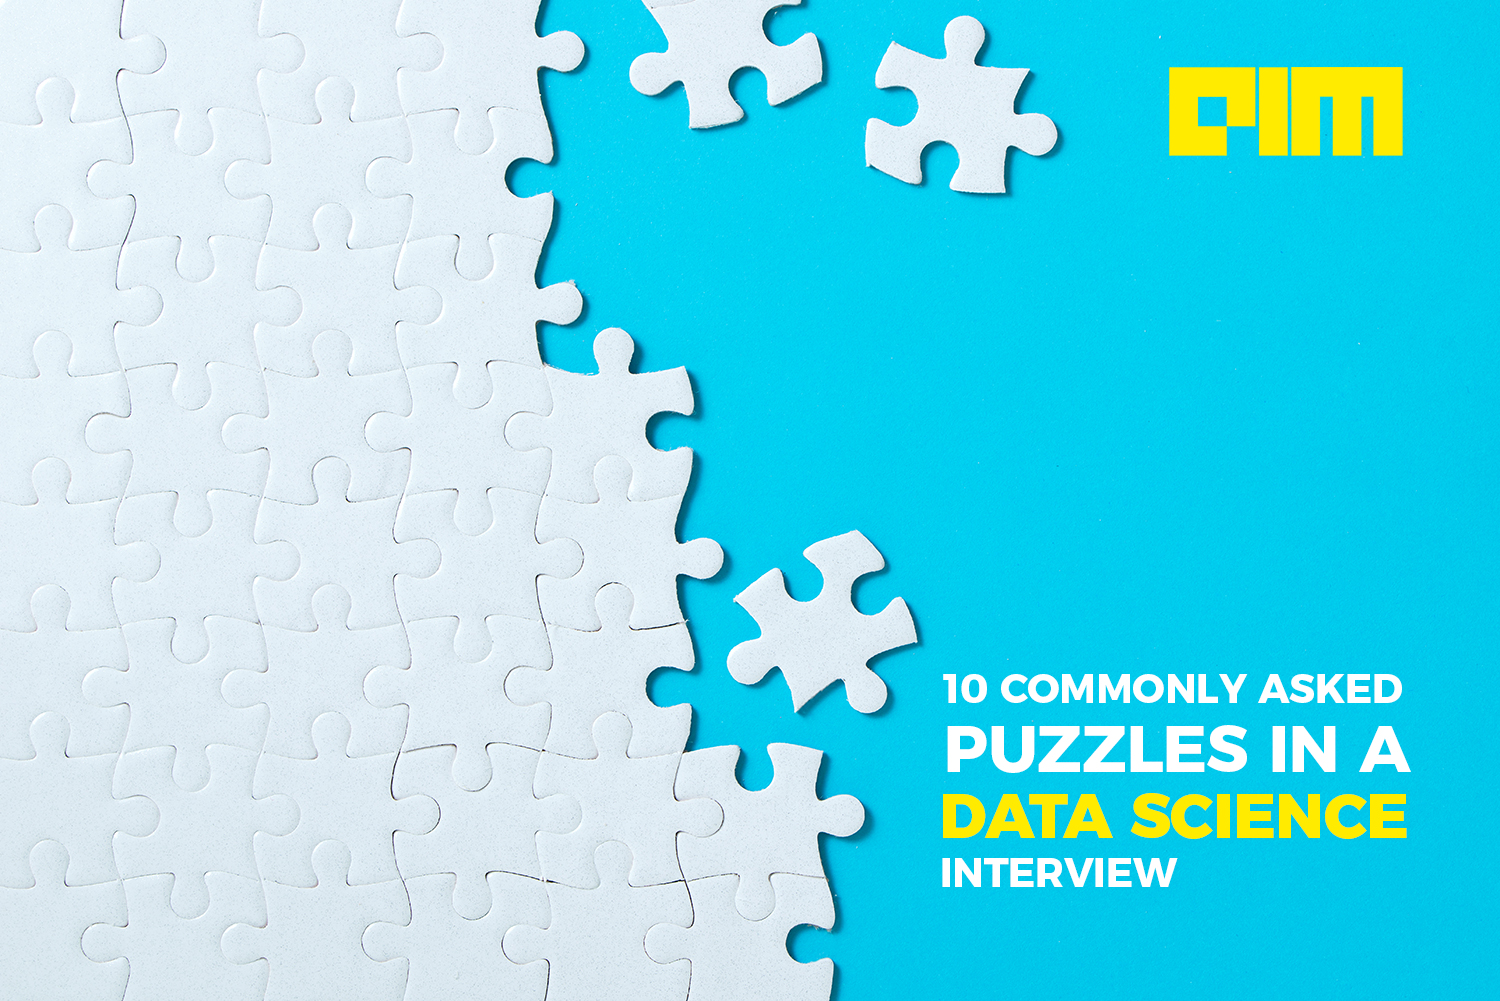 10 Commonly Asked Puzzles In A Data Science Interview